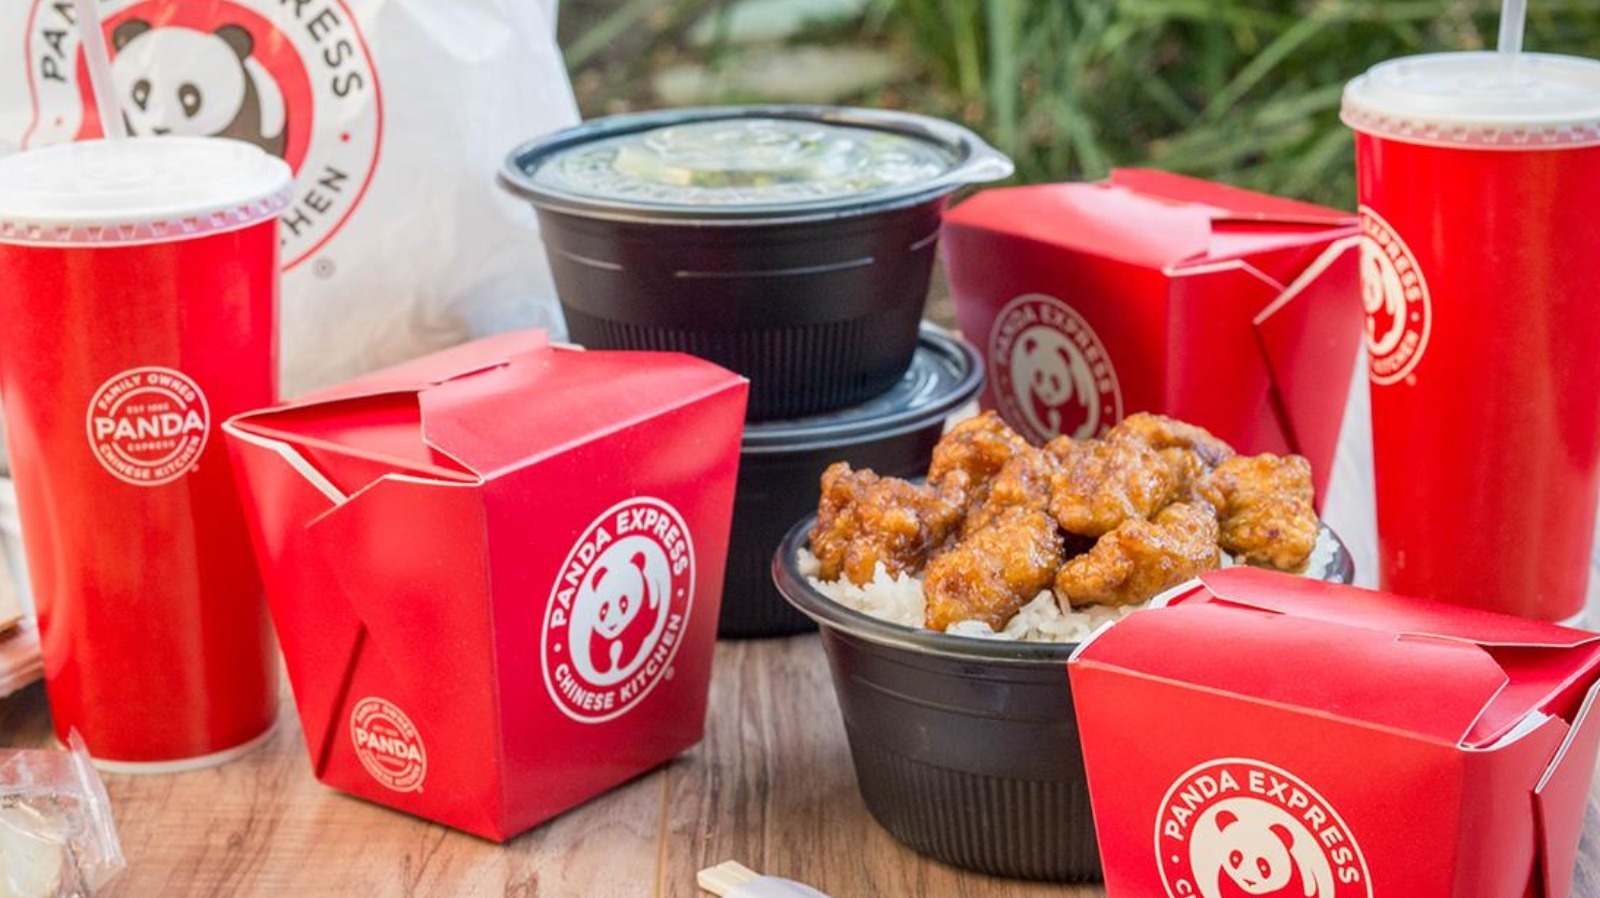 Panda Express Has Good News For Fans Of Its 29 Family Meal Deal